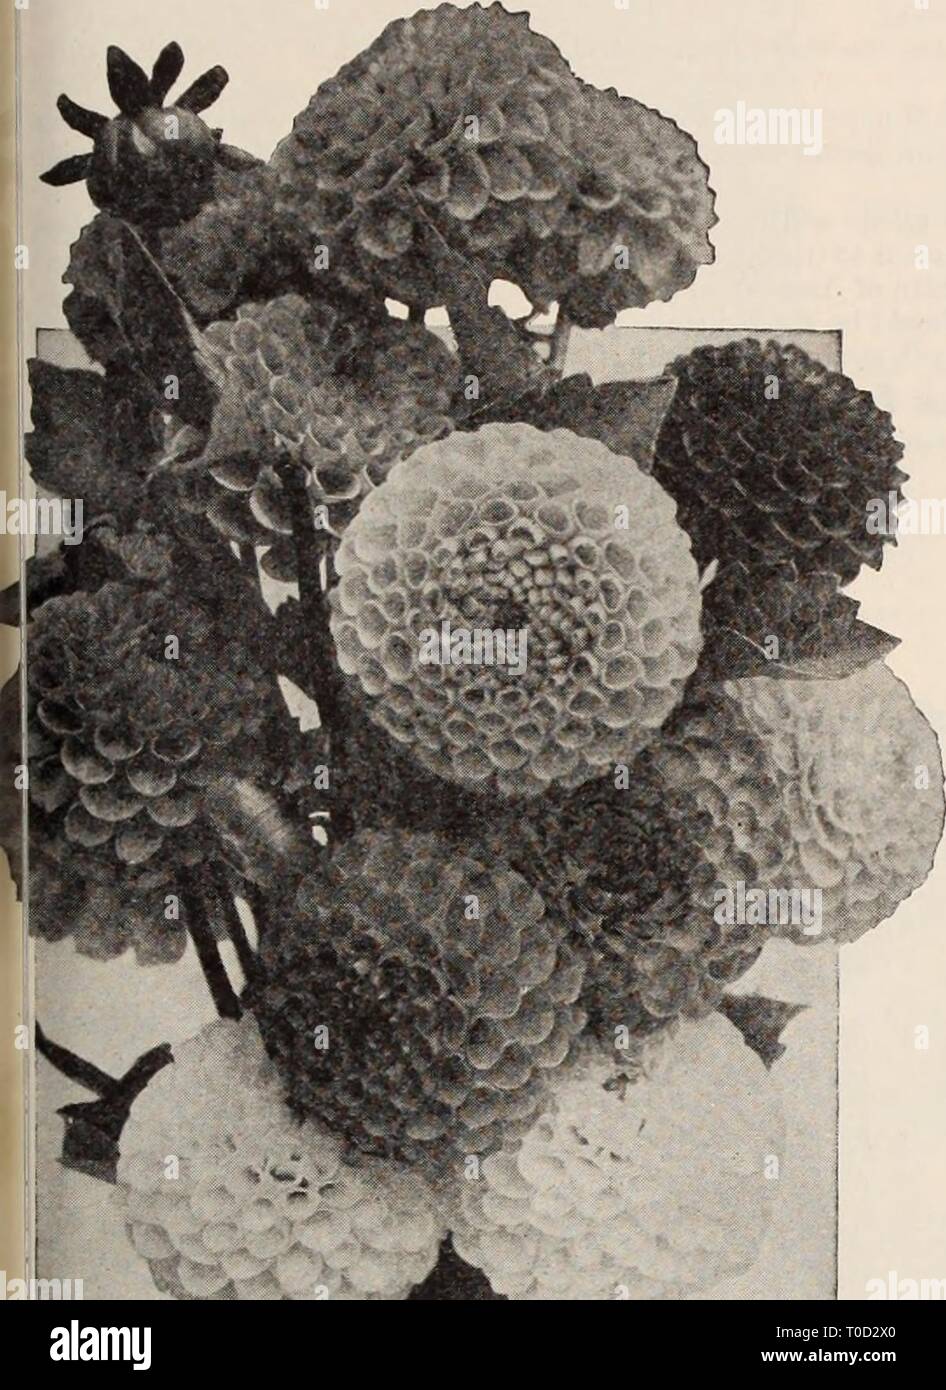 Dreer's garden book  Henry Dreer's garden book / Henry A. Dreer. dreersgardenbook1931dree Year:   ^GARDEN'i' GREENHOUSE PLANTS PH1MDELPHRR 147 Dreer's Dainty Double Pompon Dahlias These dainty little gems are admired by everybody and are deservedly growing in popular favor. They bloom most profusely from early in the season until frost, furnishing at all times an abundance of perfect flowers on good stems suitable for cutting, for which purpose they are exceptionally well adapted, lending themselves admirably to house and particularly to table decoration, where larger Dahlias would be out of p Stock Photo